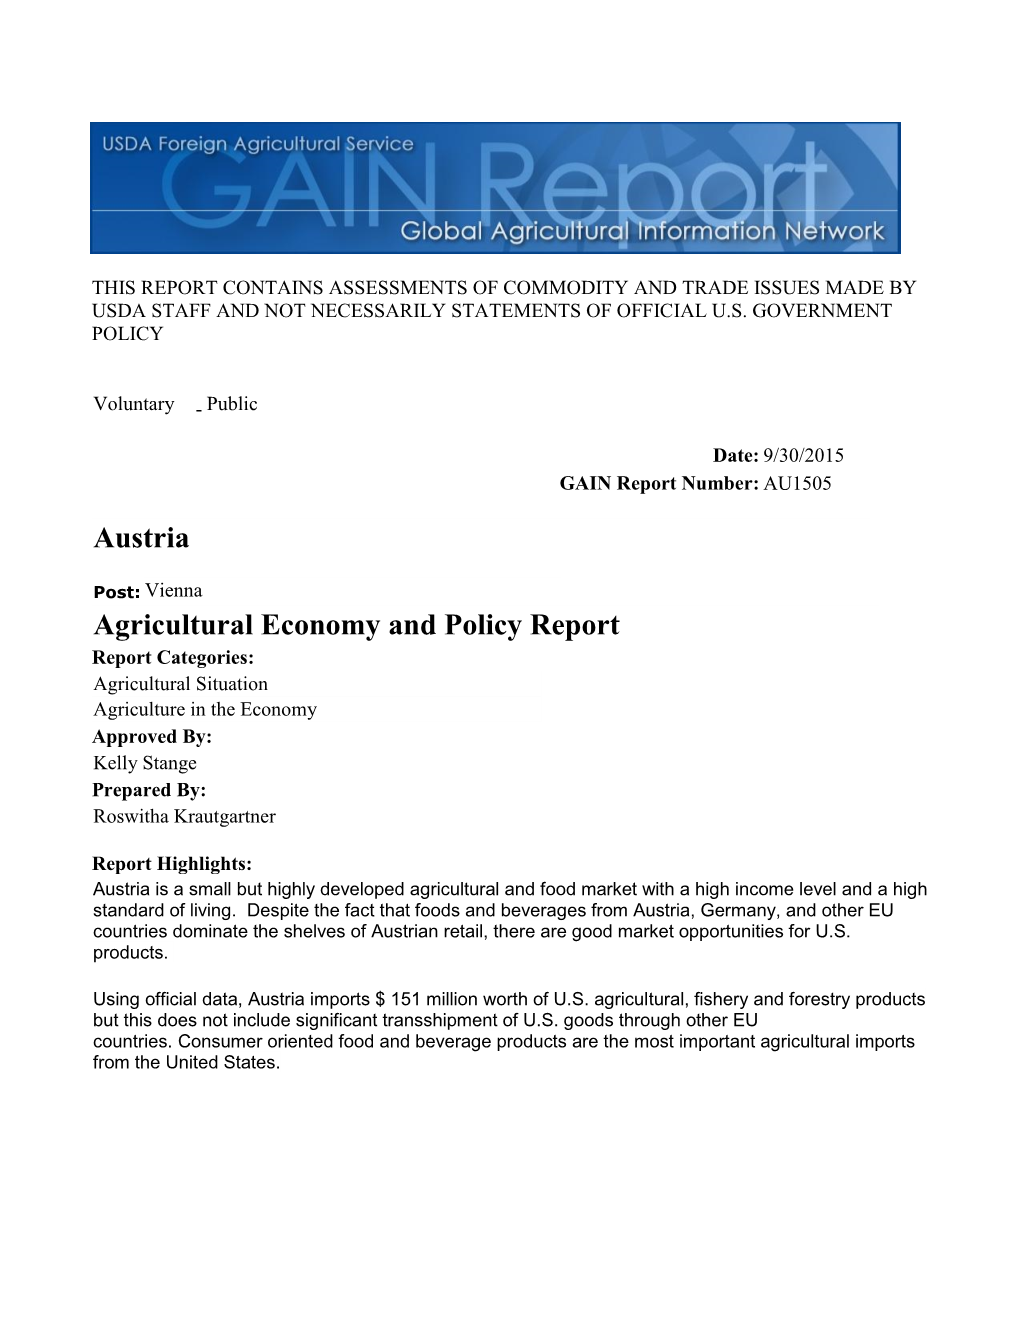 Agricultural Economy and Policy Report Austria